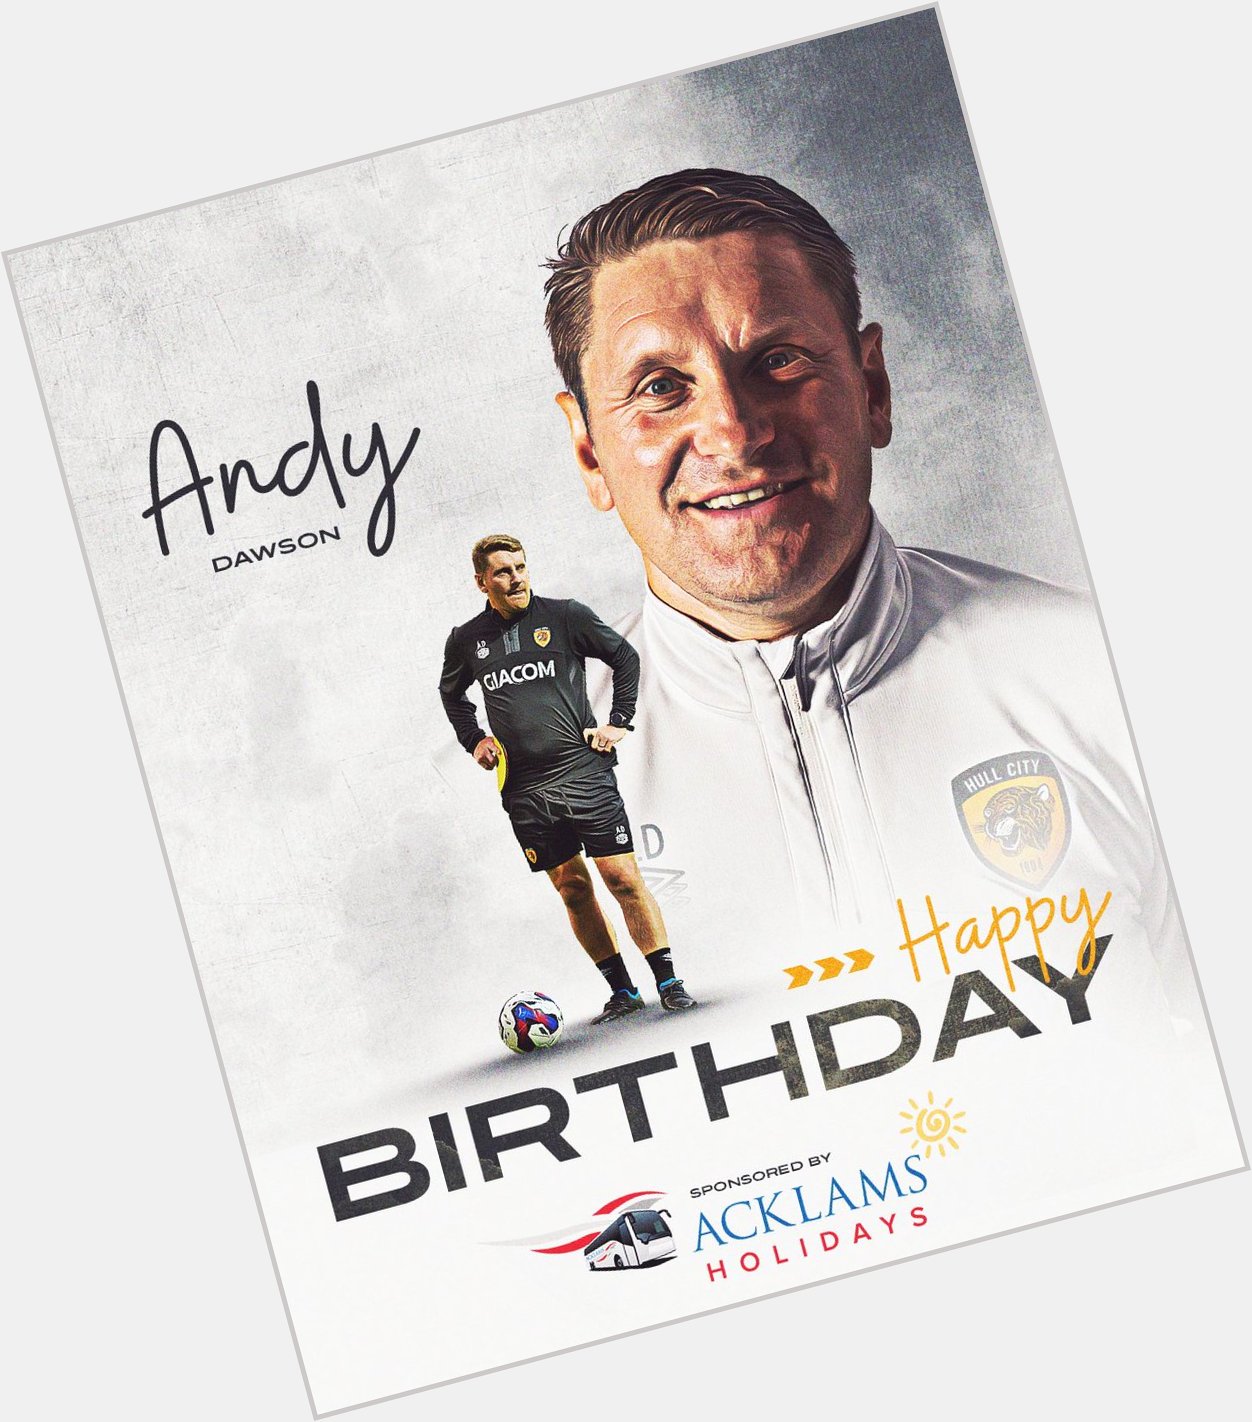  Happy Birthday to Andy Dawson! Hope you have a great day! | 